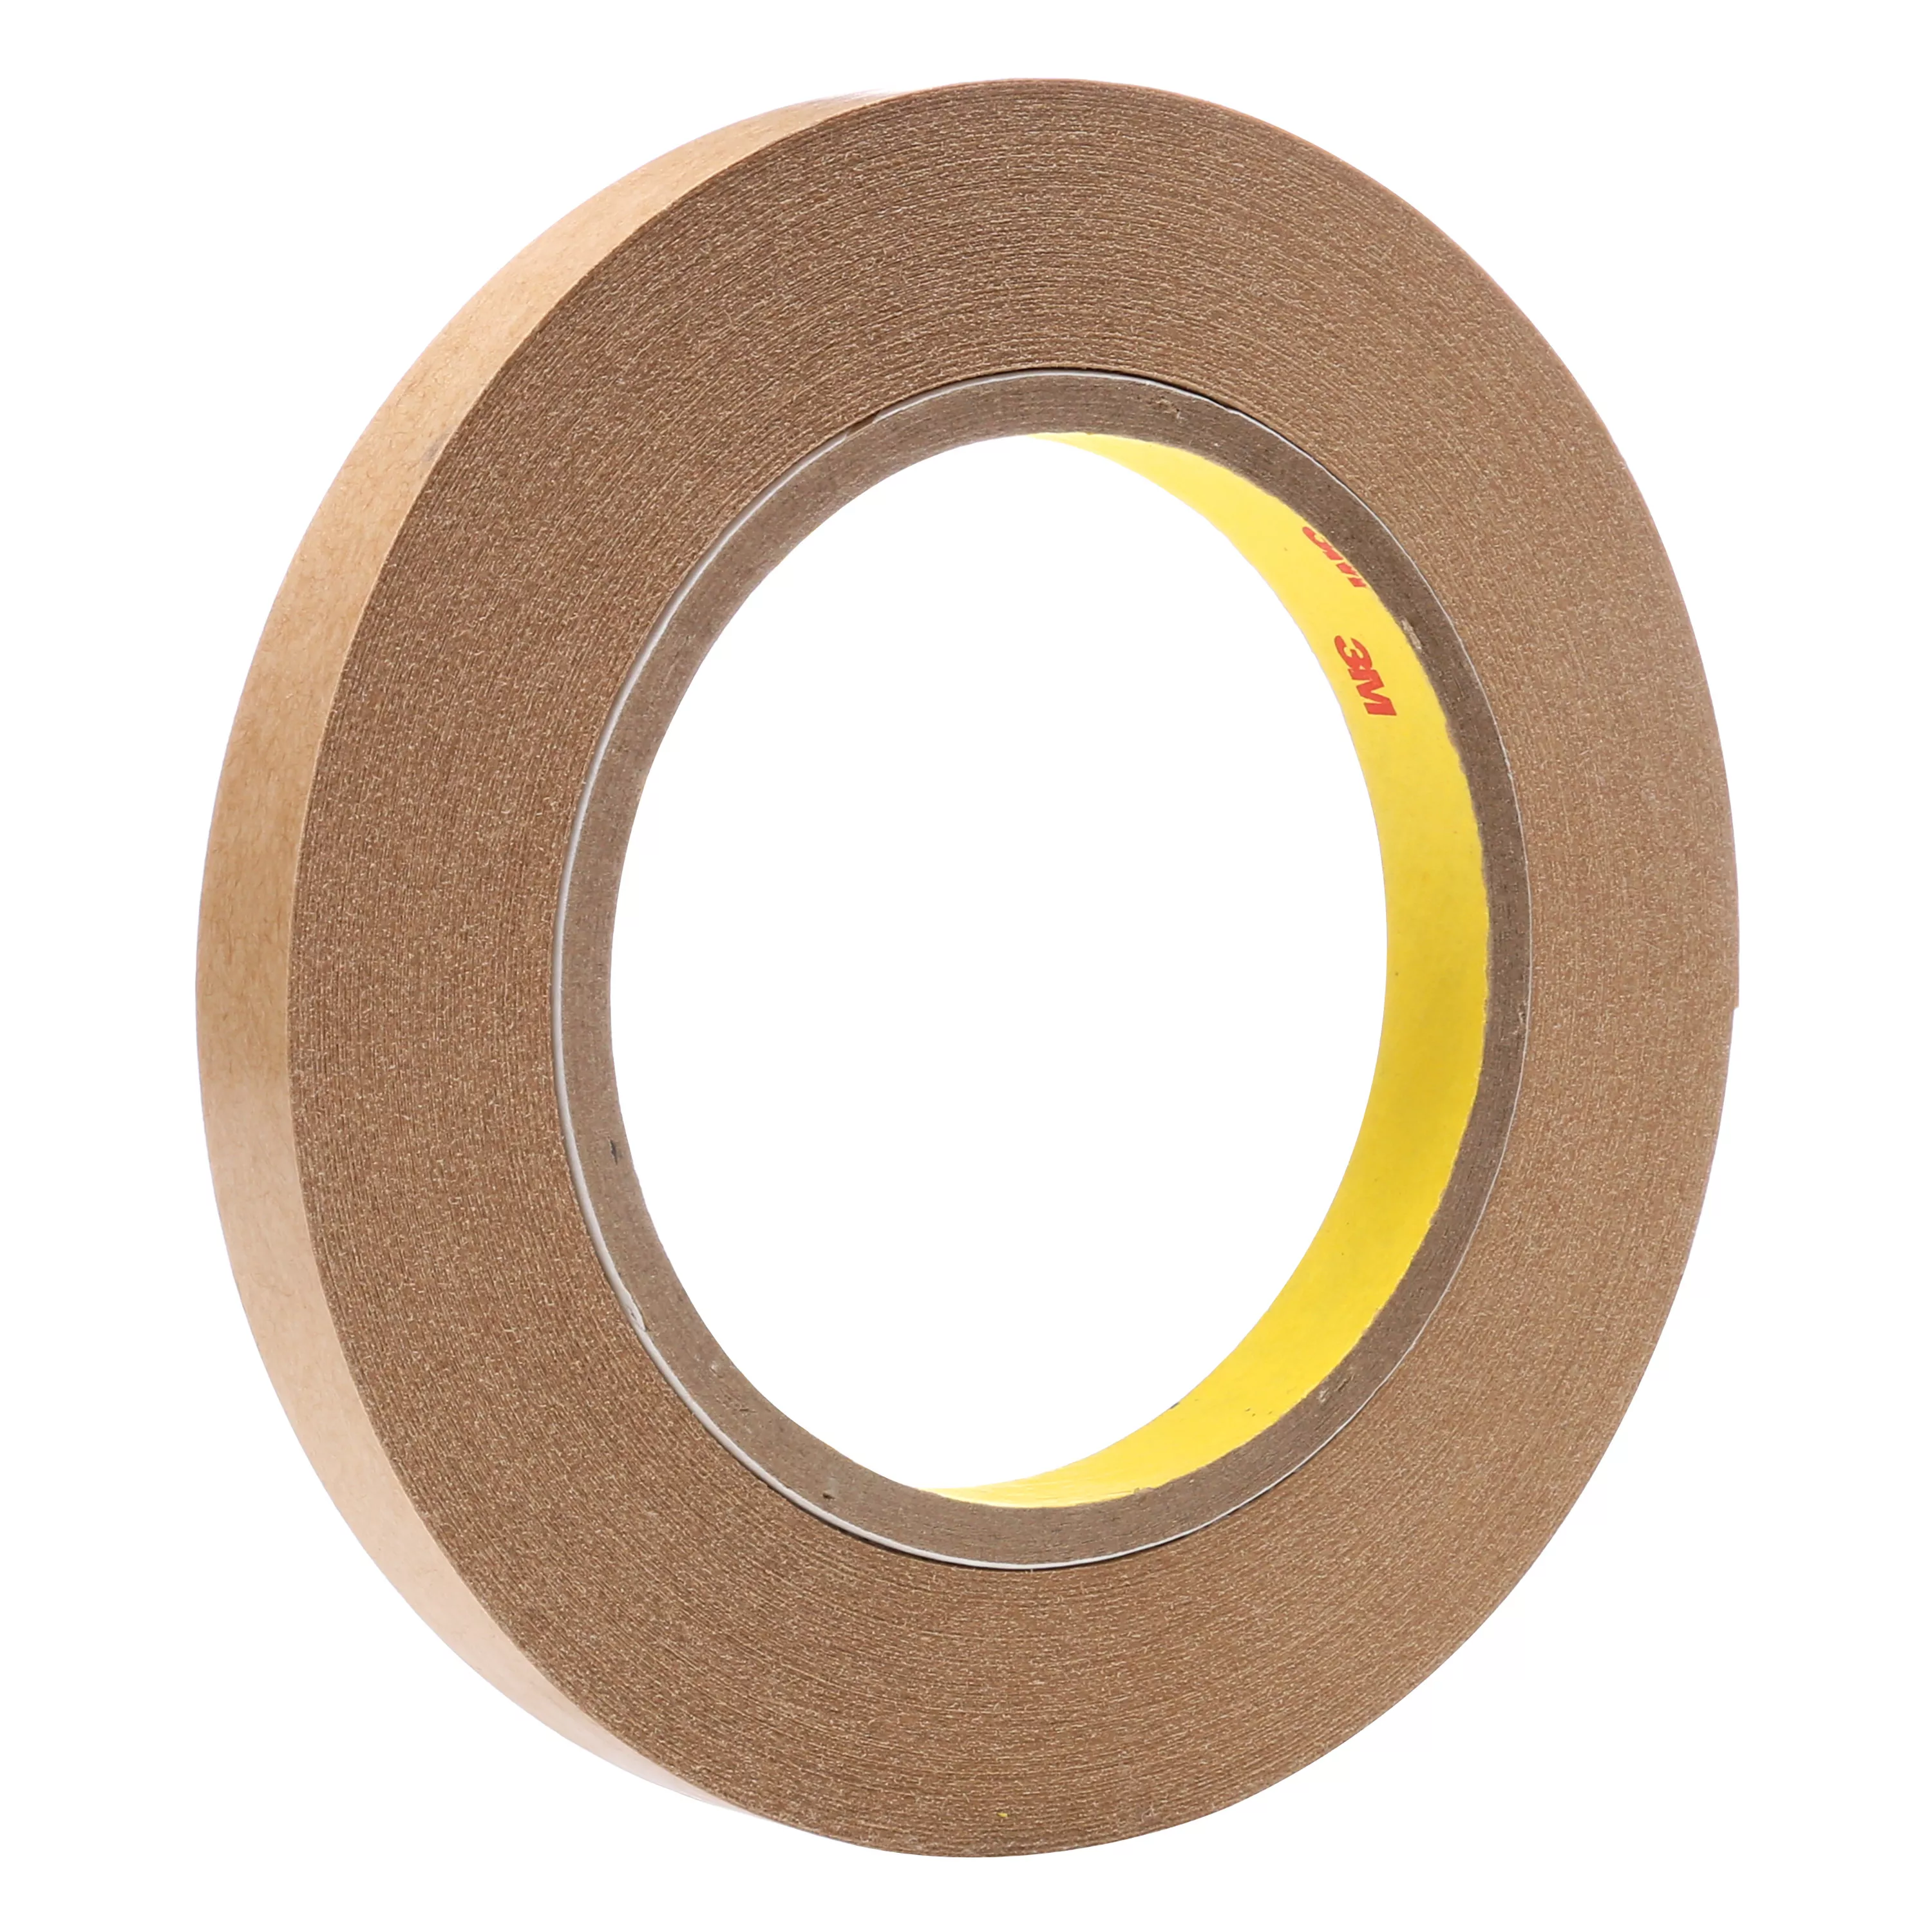 3M™ Adhesive Transfer Tape 465, Clear, 1/2 in x 60 yd, 2 mil, 72
Roll/Case